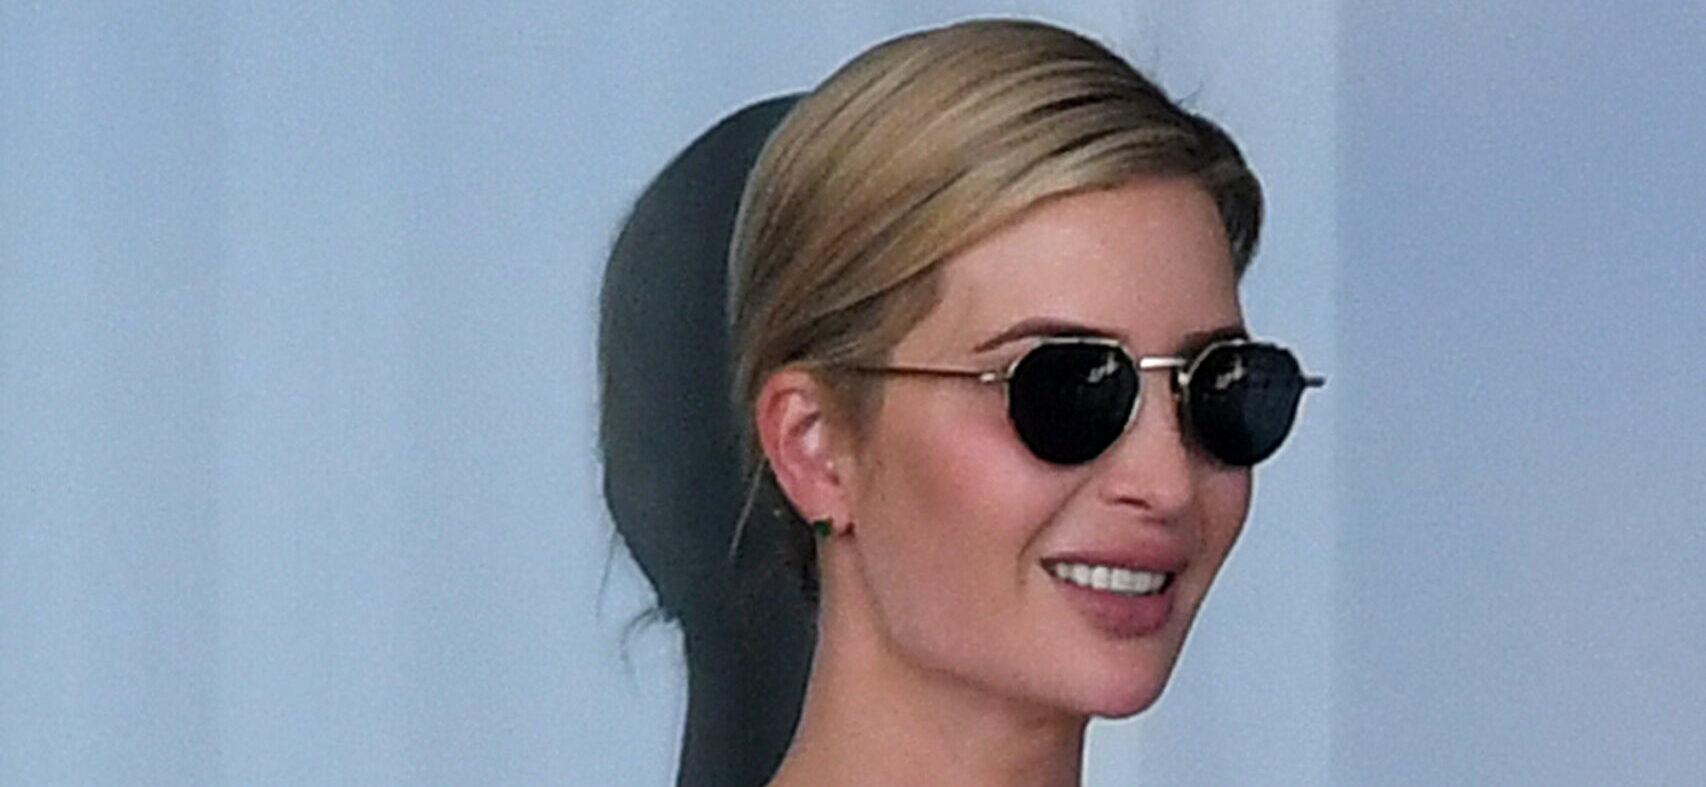 Ivanka Trump and Jared Kushner seem to be in good spirits as they conduct a meeting on the balcony of their apartment in Miami